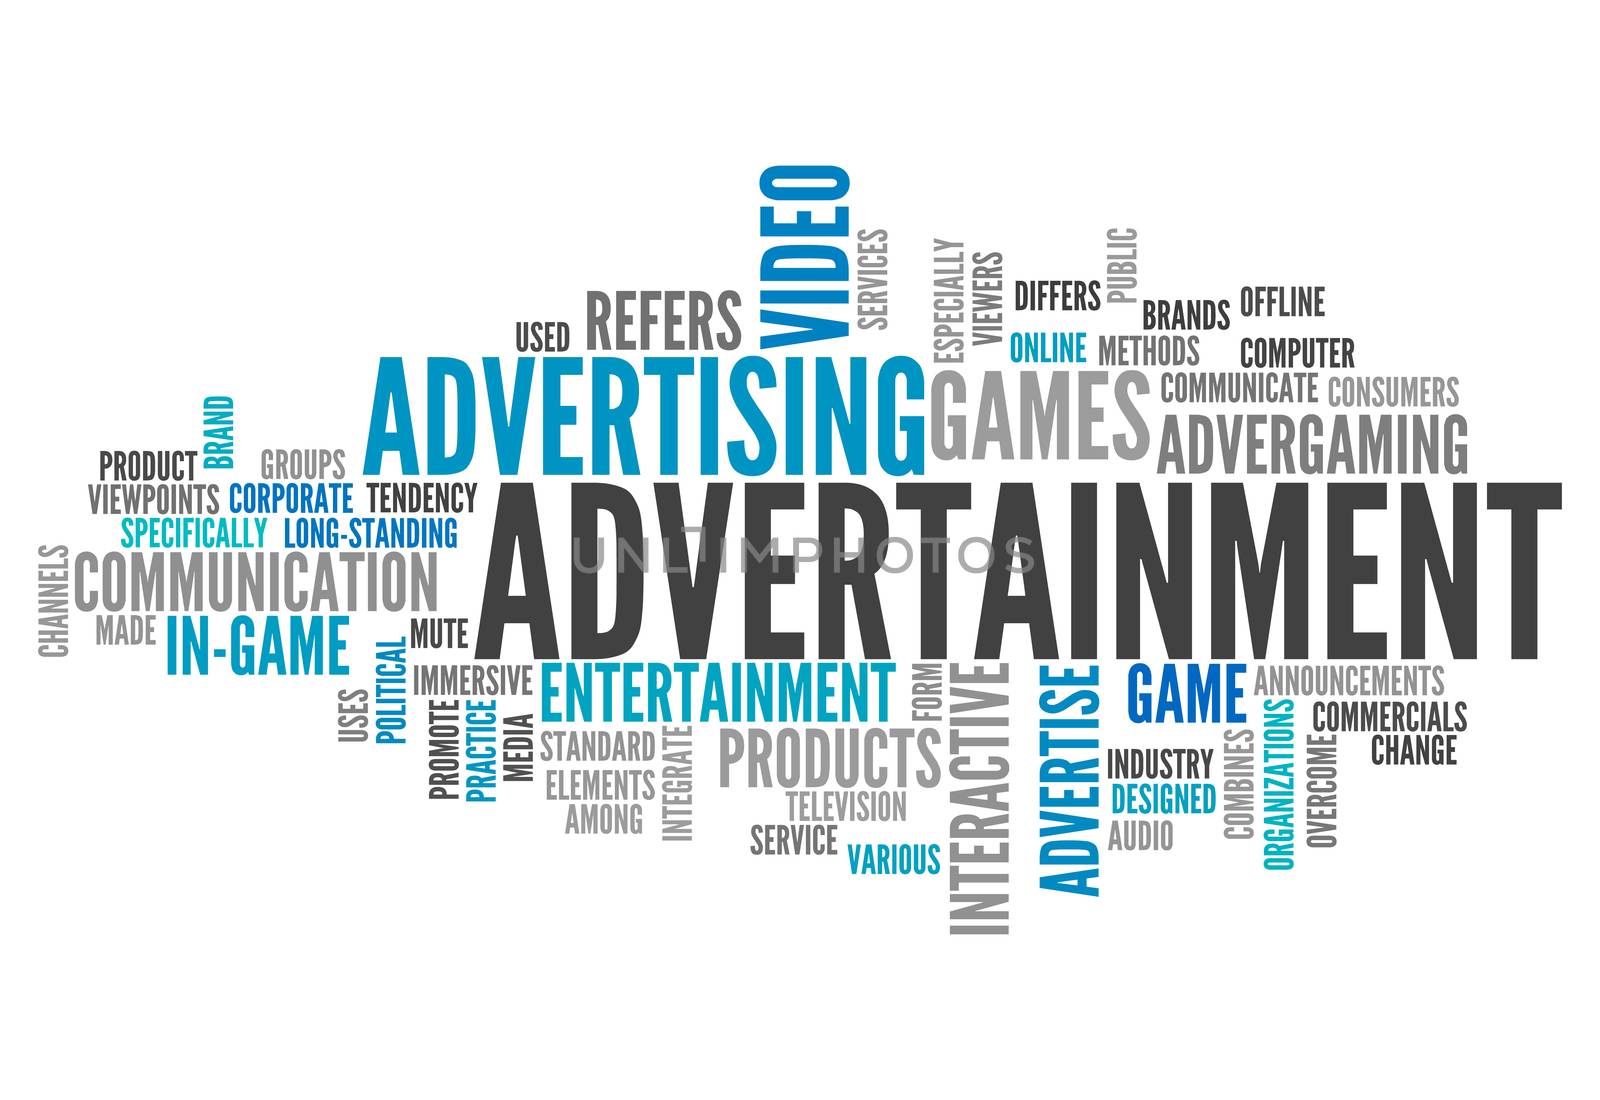 Word Cloud "Advertainment" by mindscanner